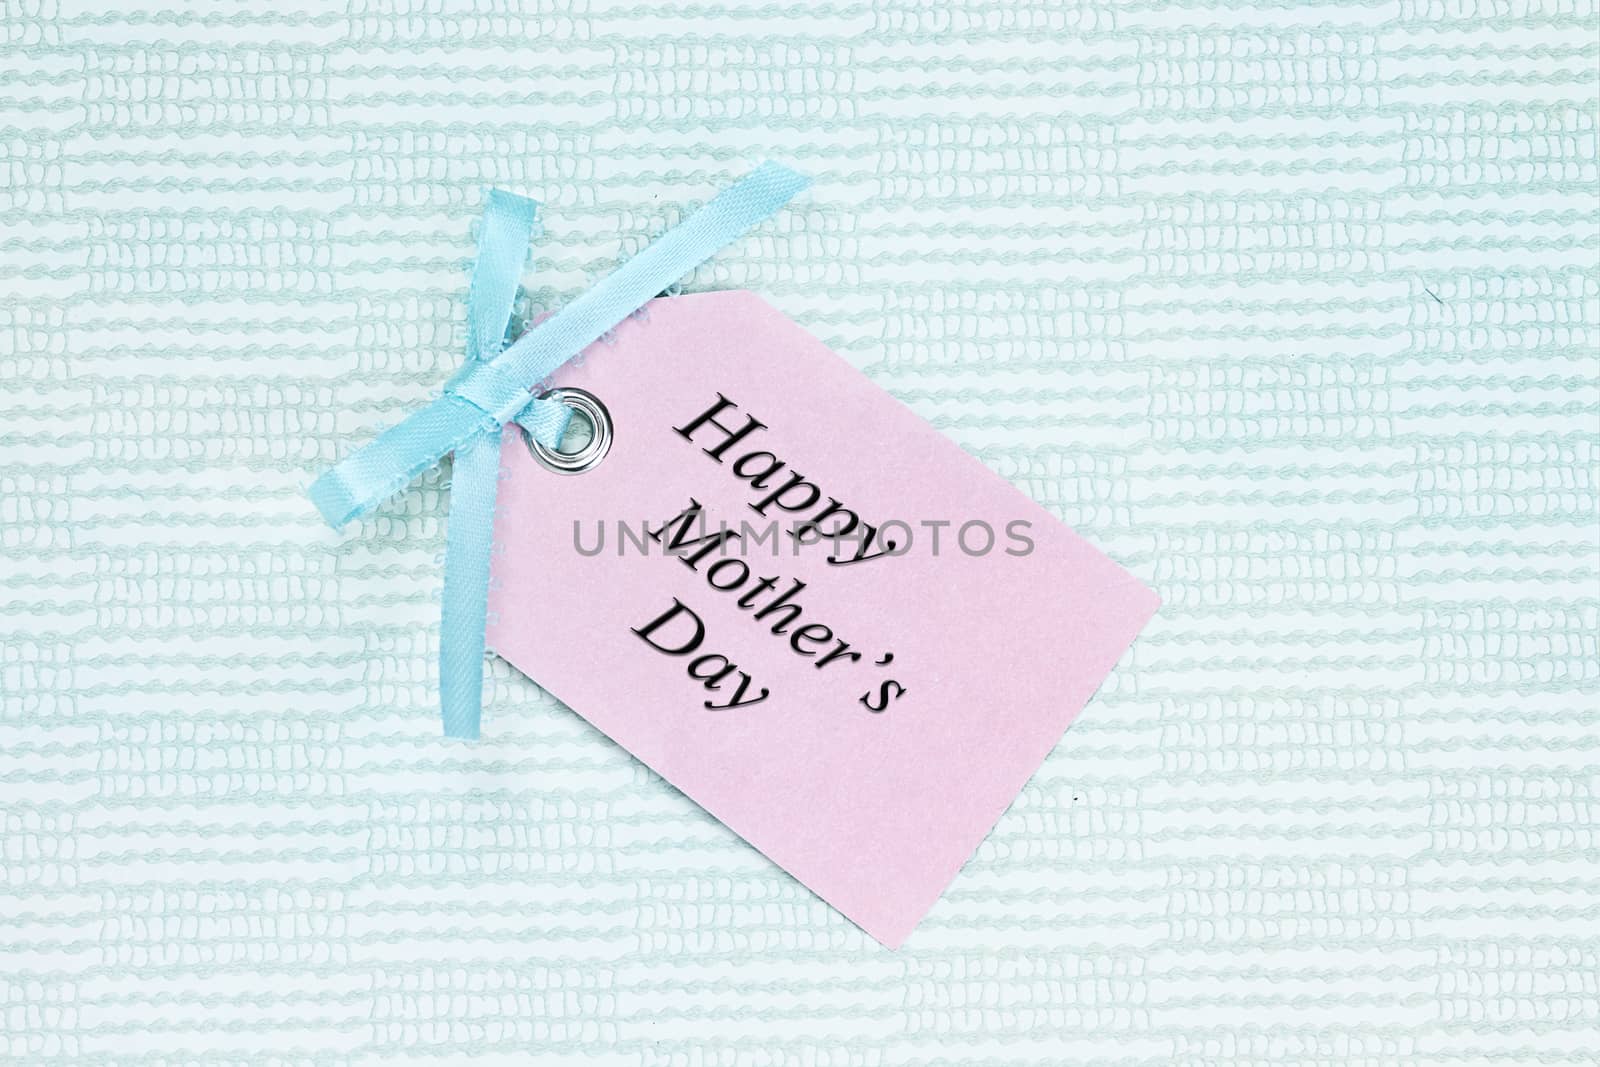 Tag with Happy Mothers Day text.